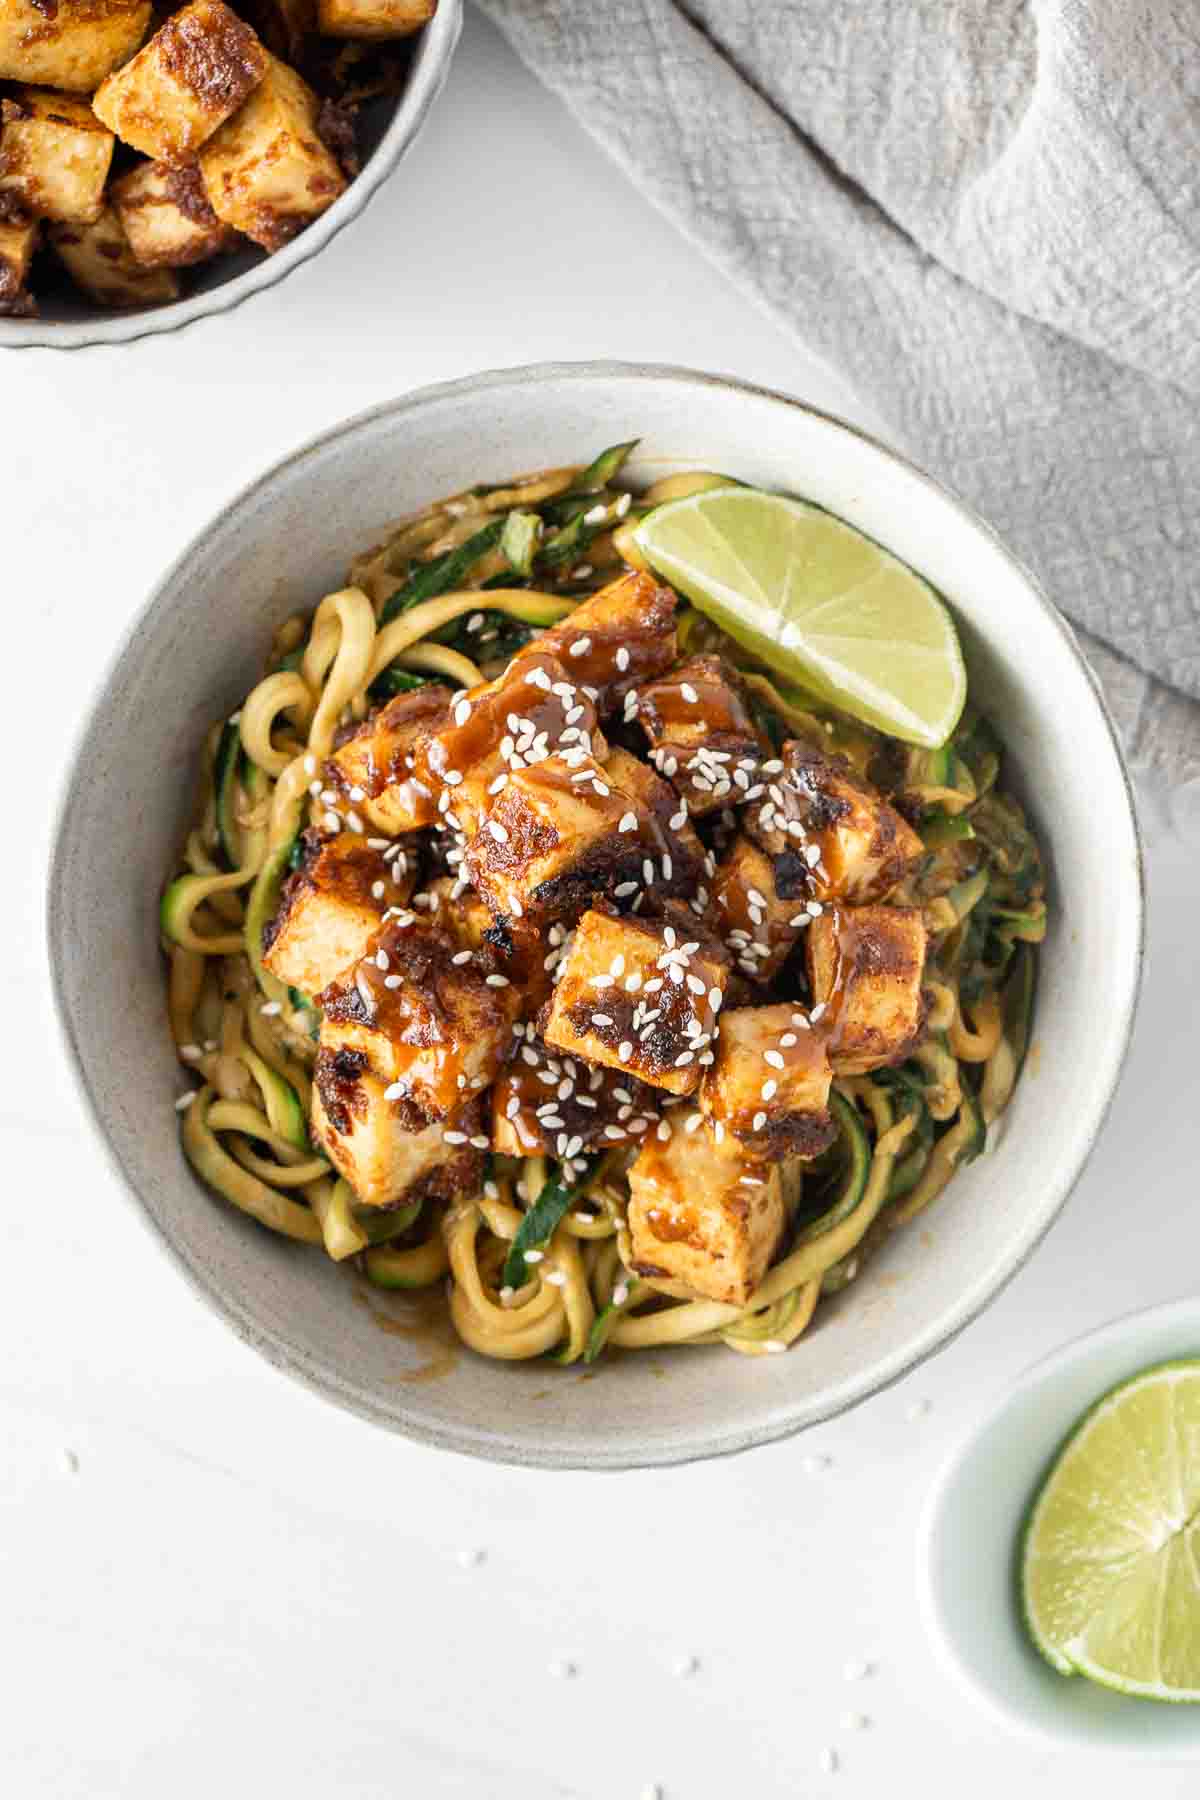 Crispy tofu and zoodles in a peanut sauce in a bowl with a wedge of lime.